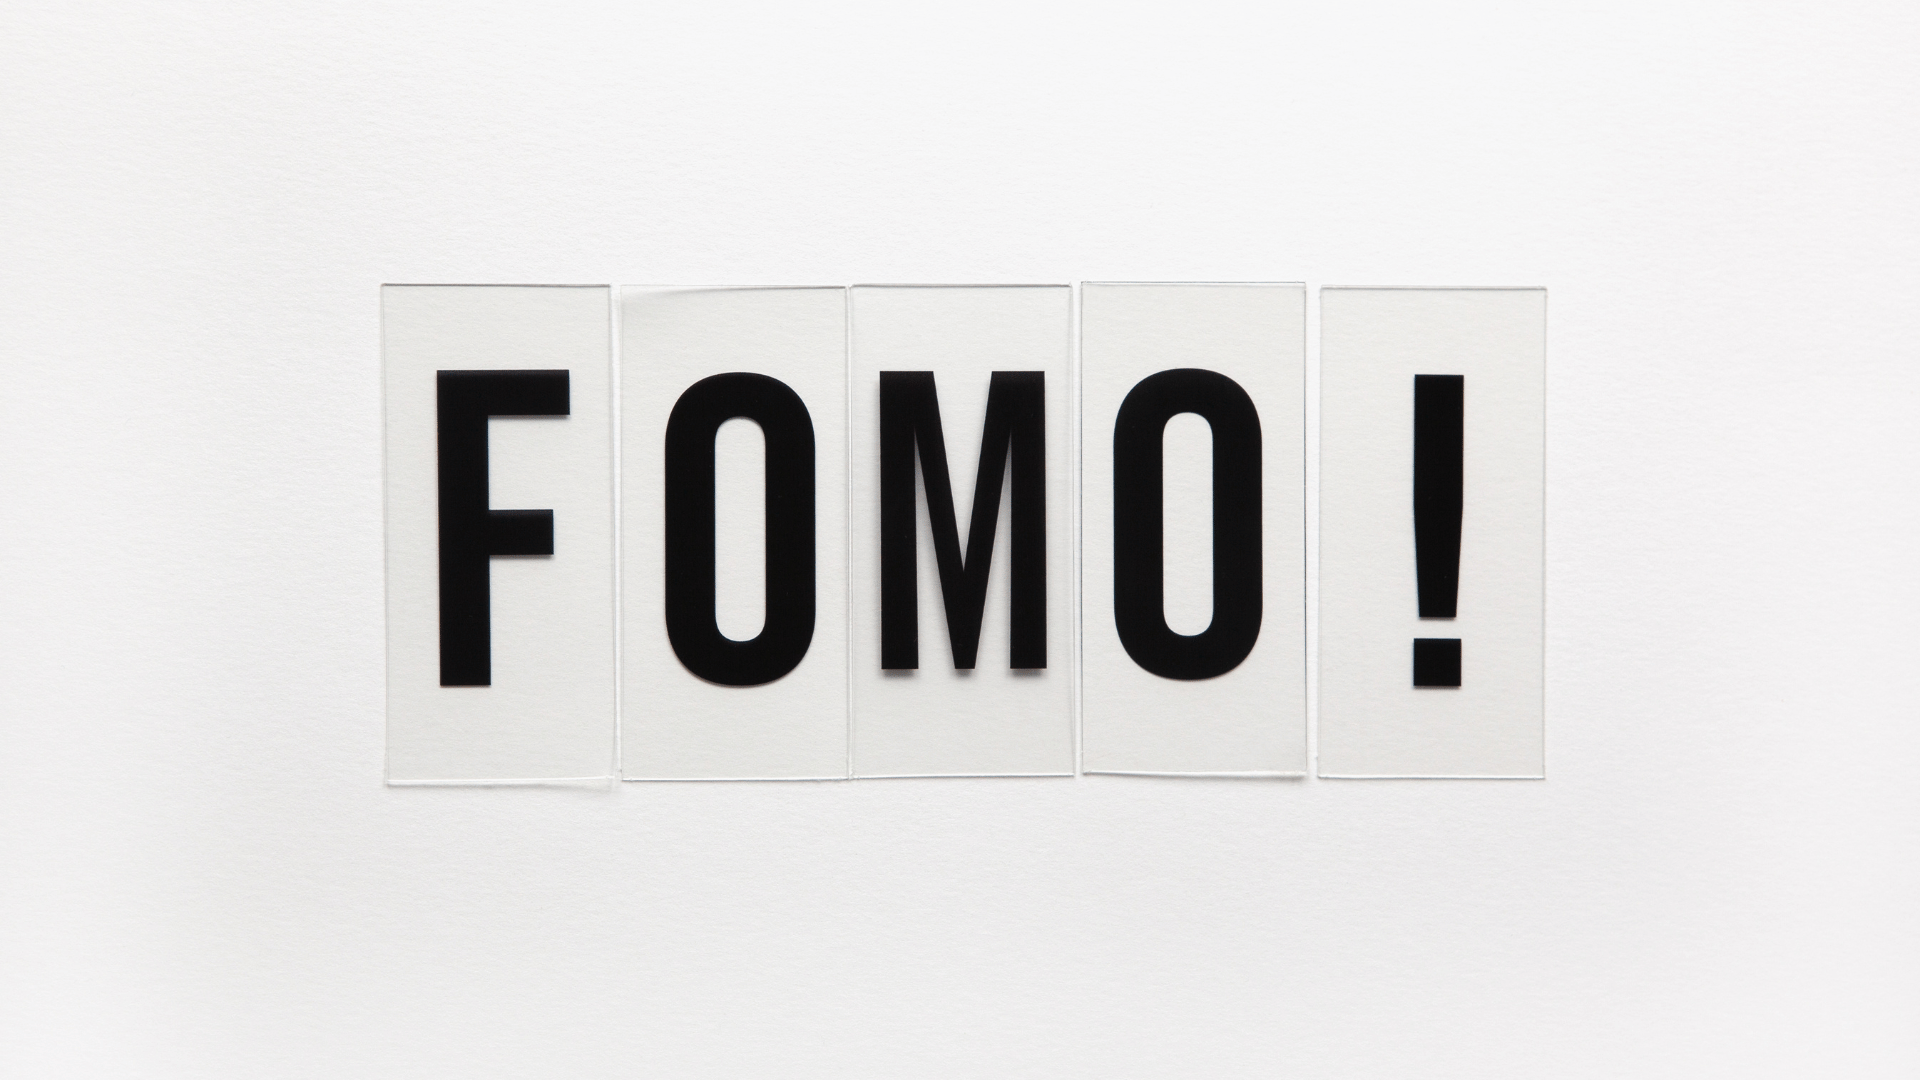 the word fomo is written in black letters on a white background .